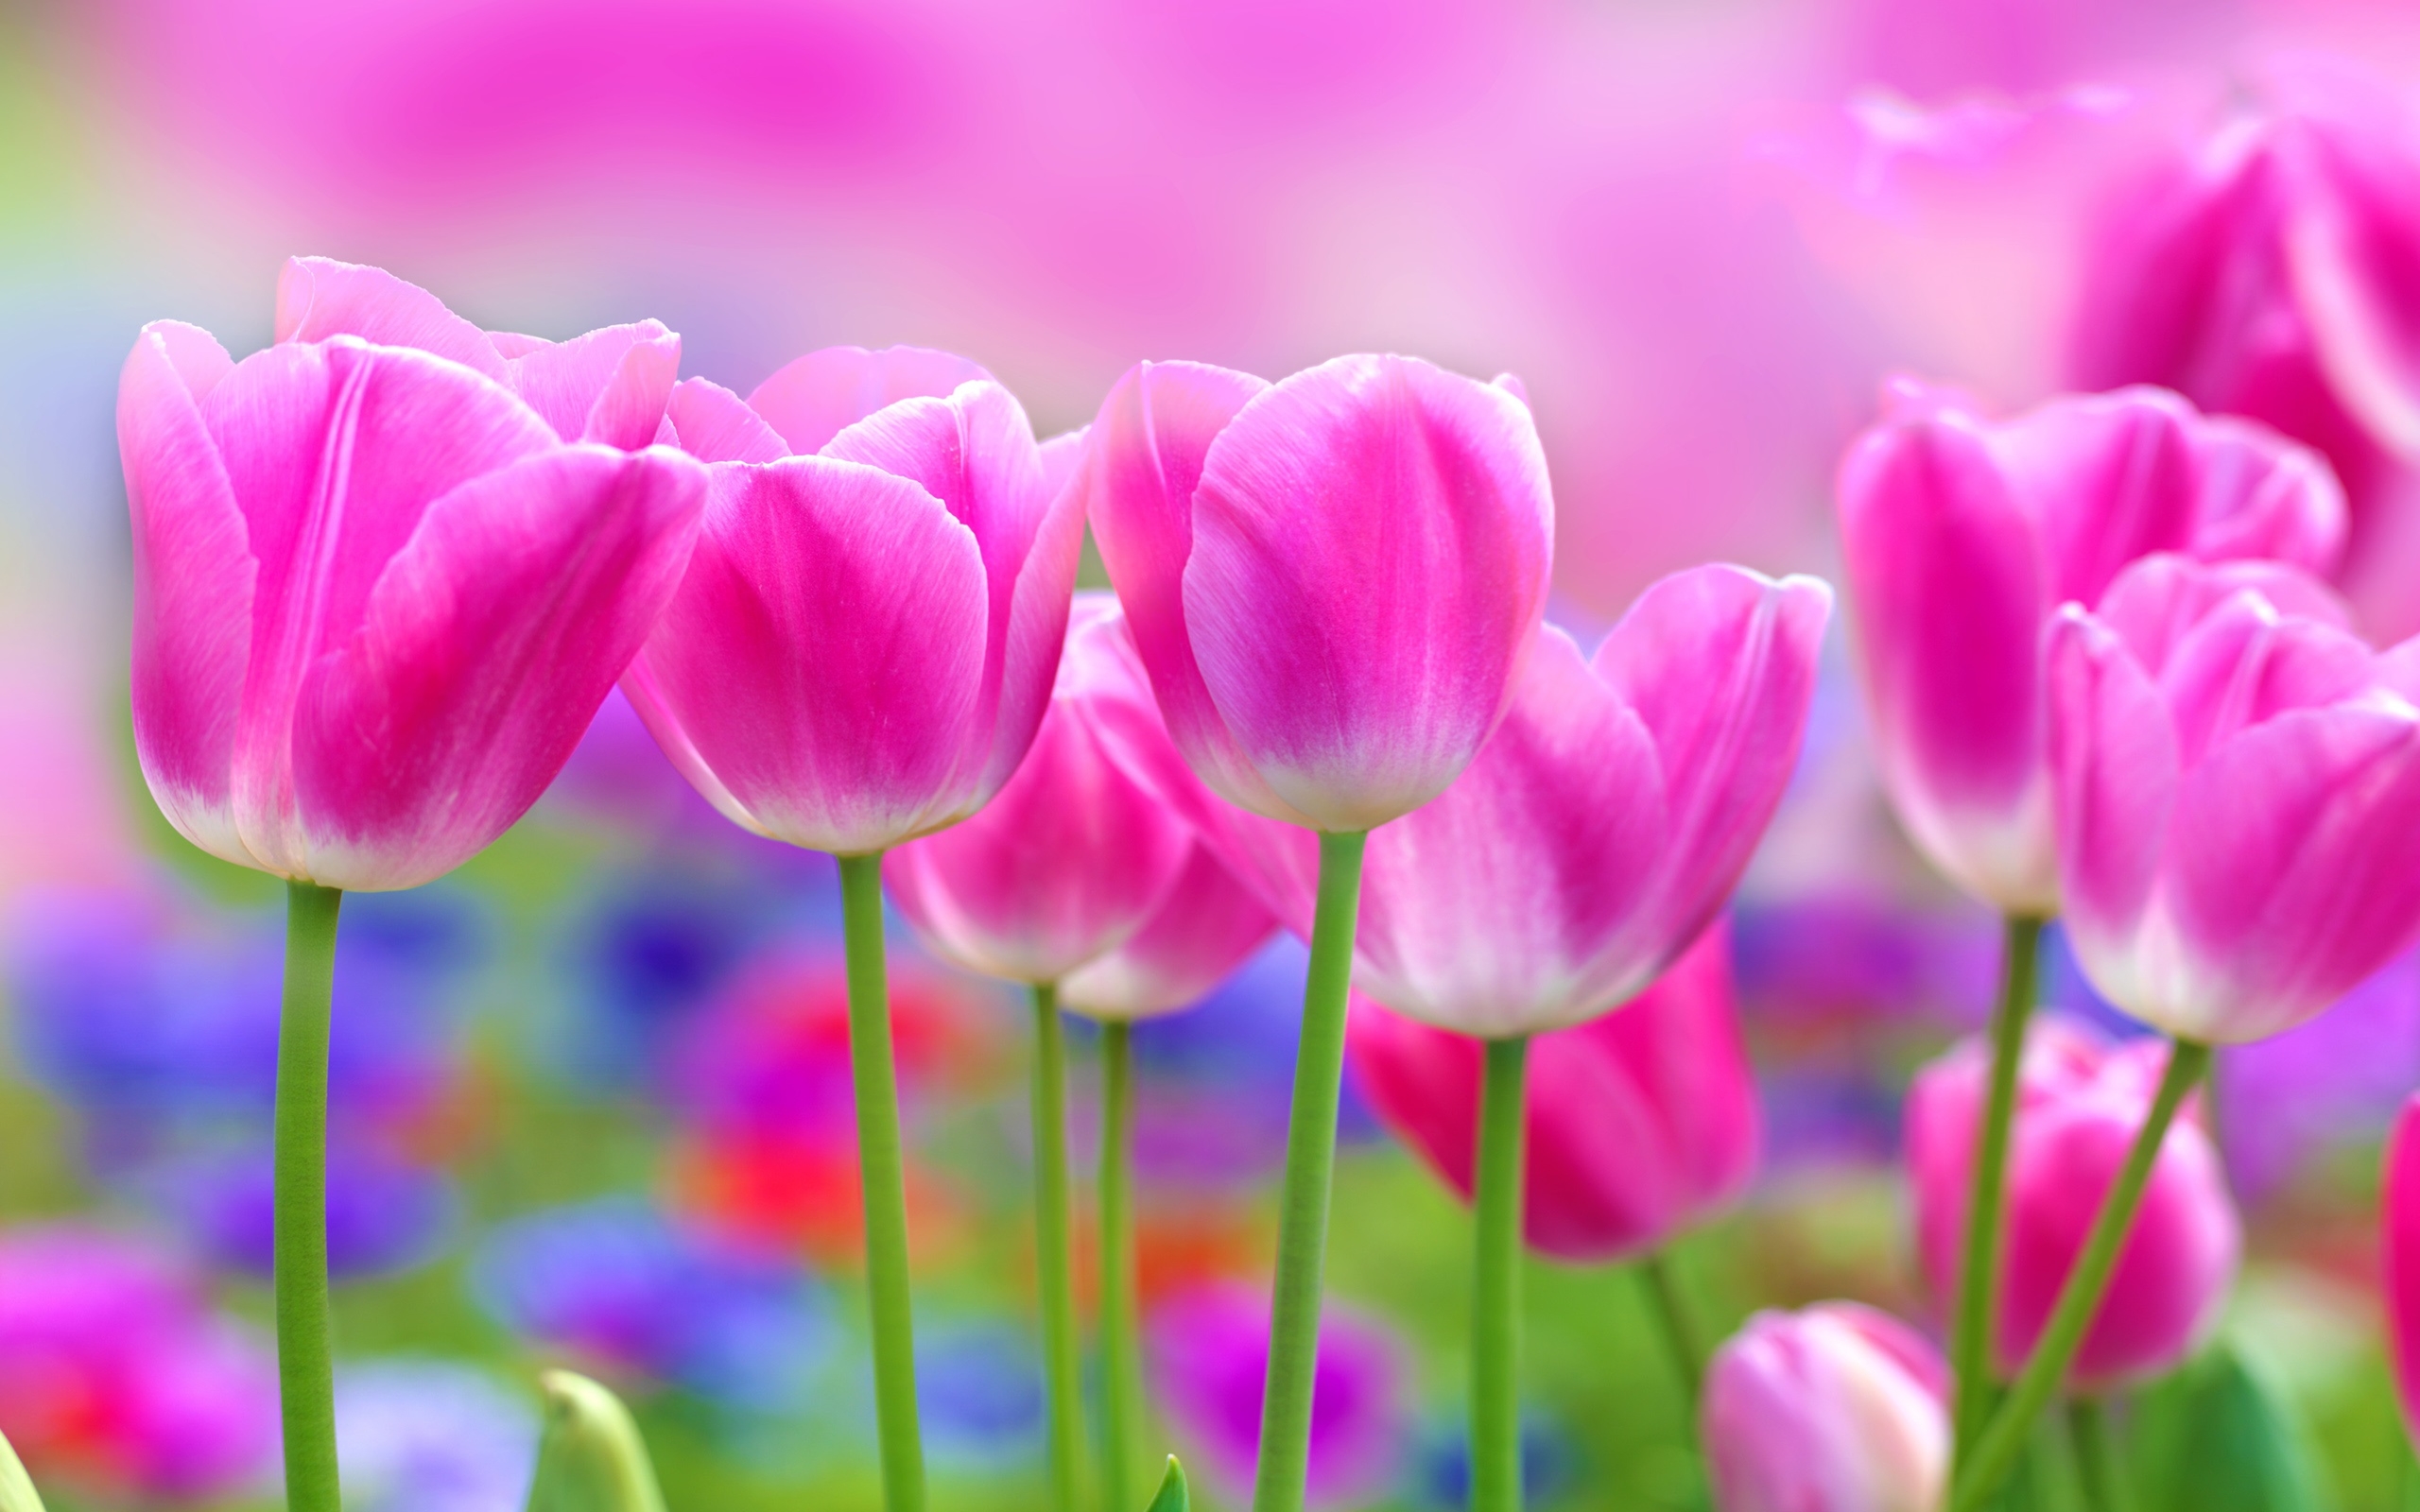 Beautiful Pink Tulips Flowers Blur Background 2560x1600 : Wallpapers13.com